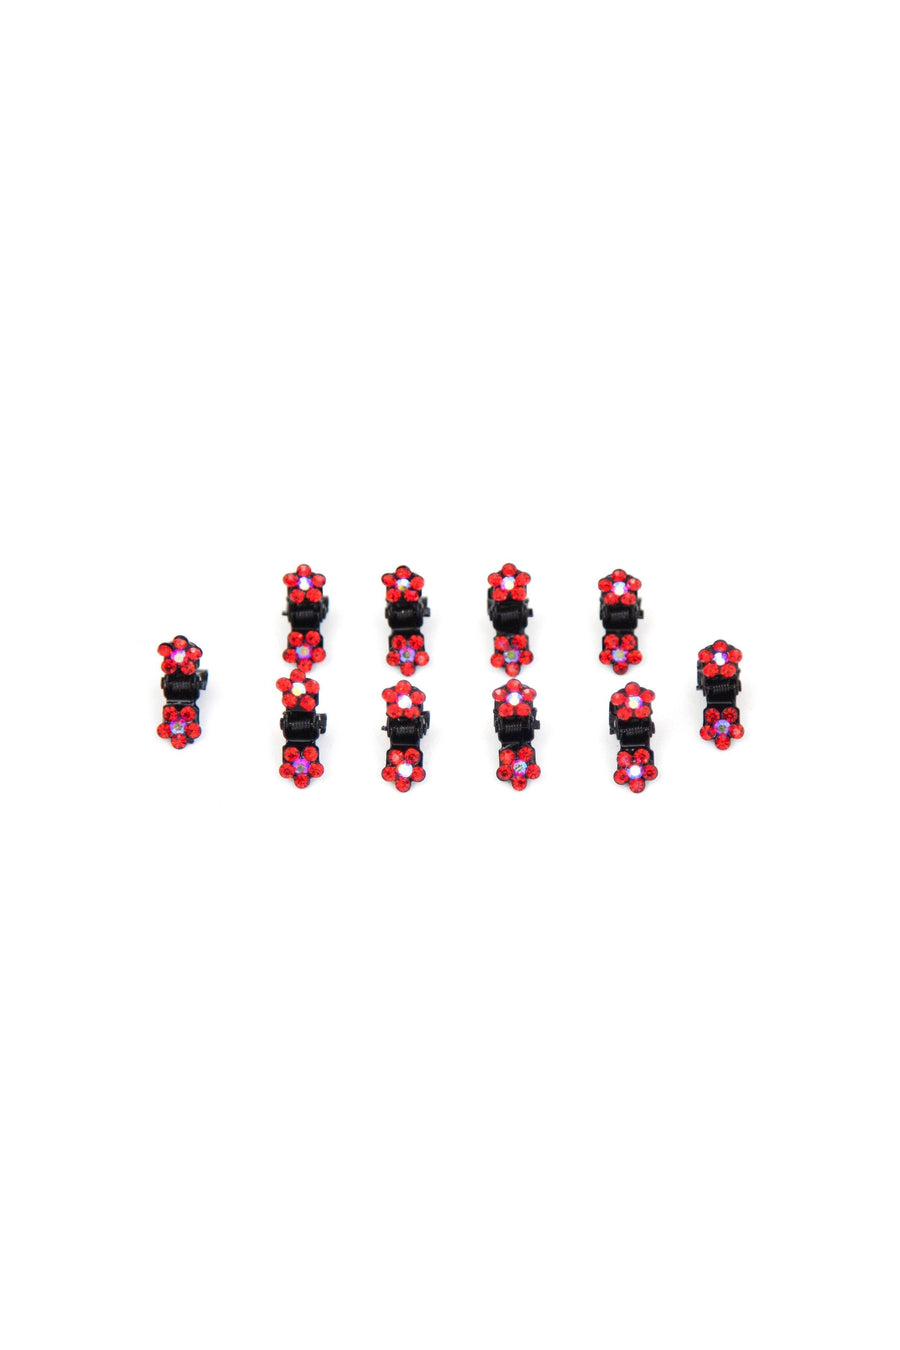 Soho Style Hair Jaws Red / Pack of 10 Mini Flower Hair Jaws with Crystal Petals Black Body